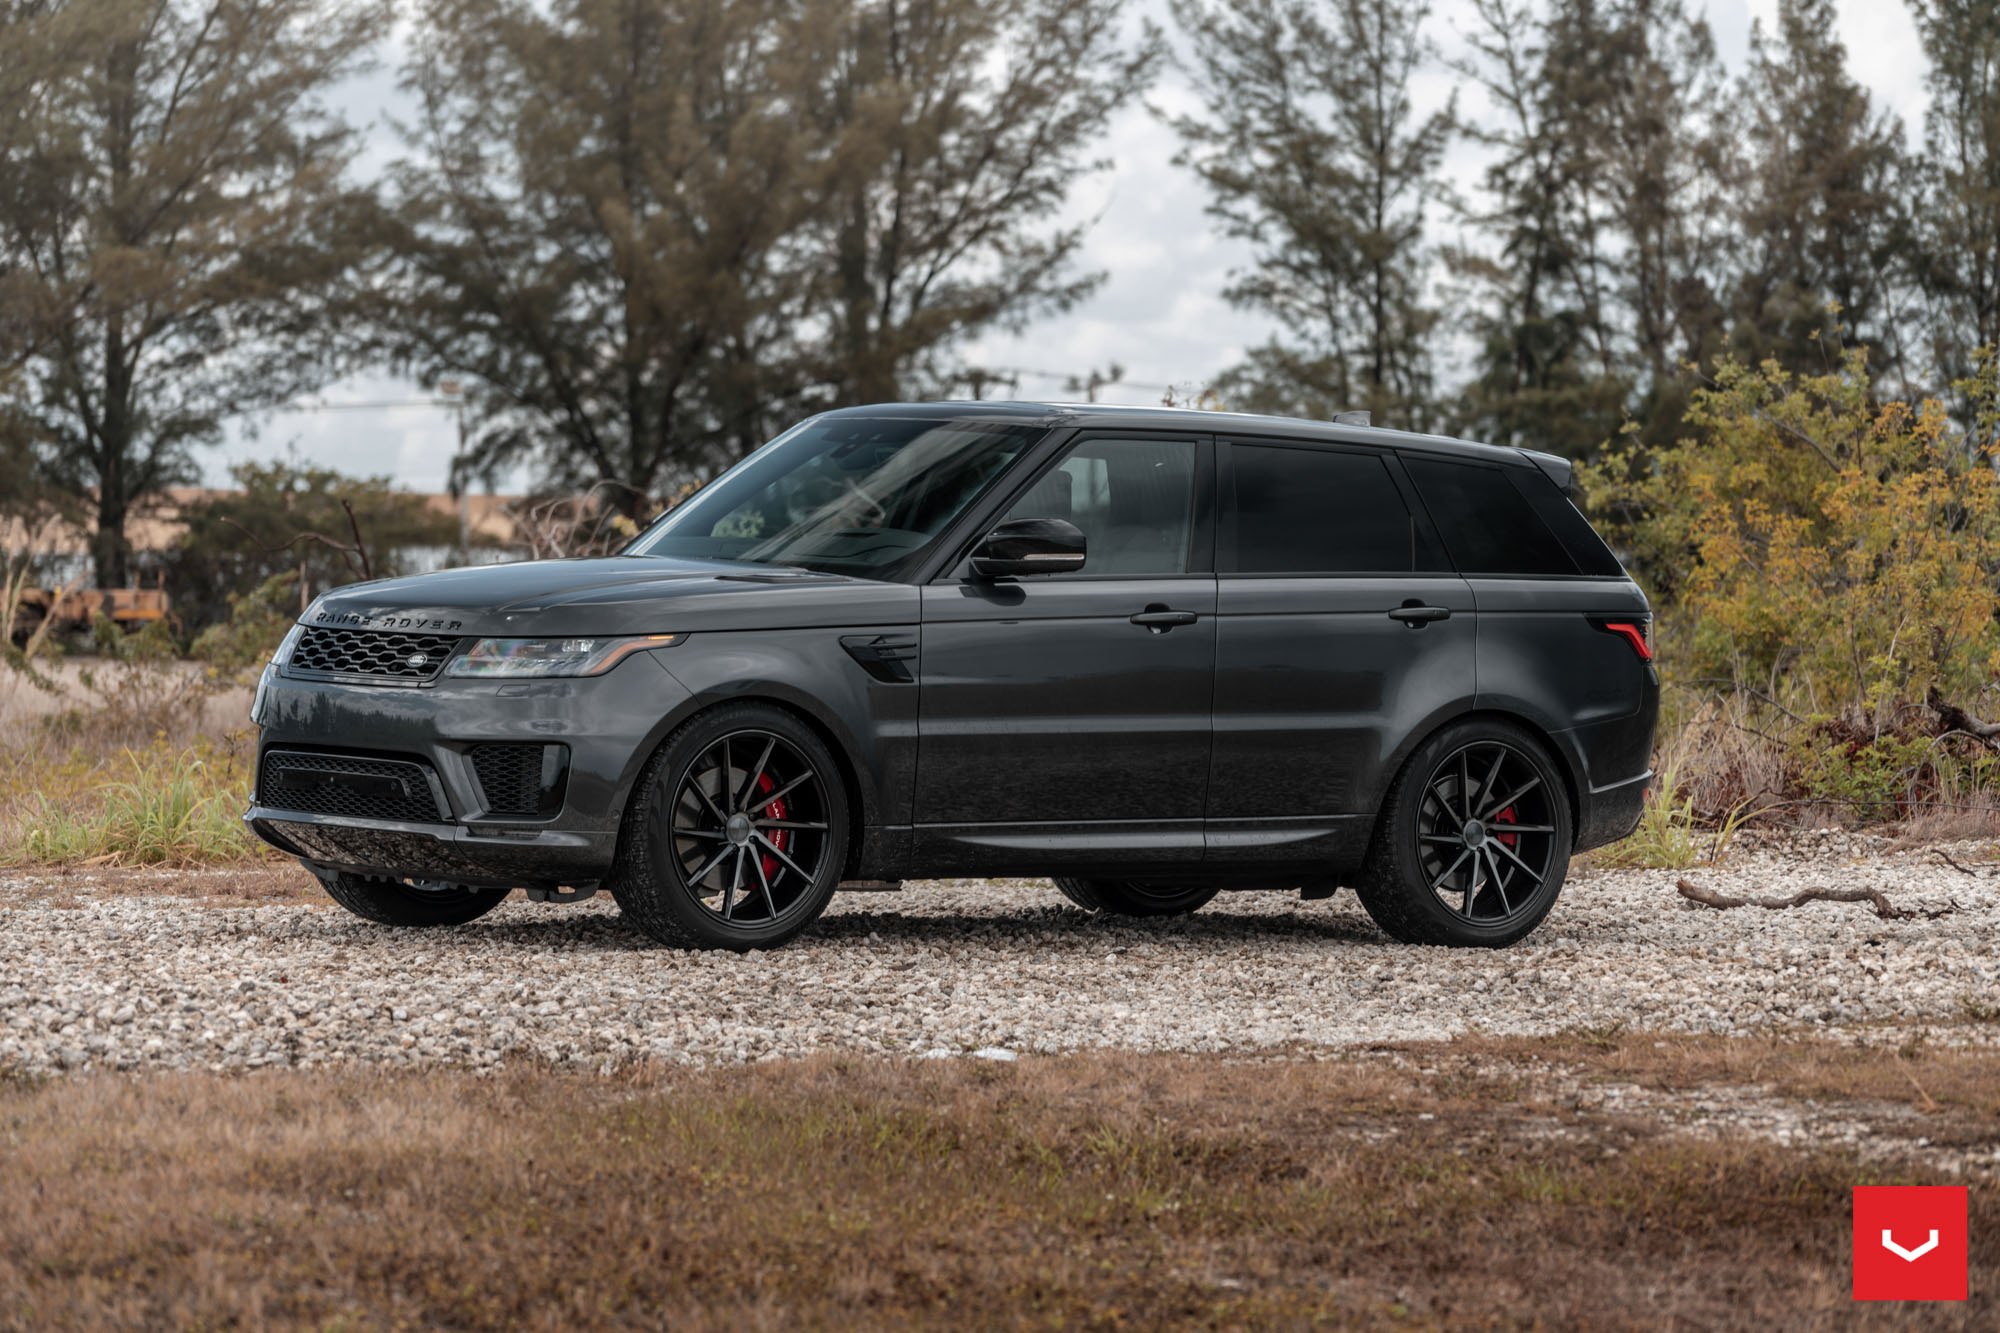 Black Range Rover Sport with Aftermarket Side Skirts - Photo by Vossen